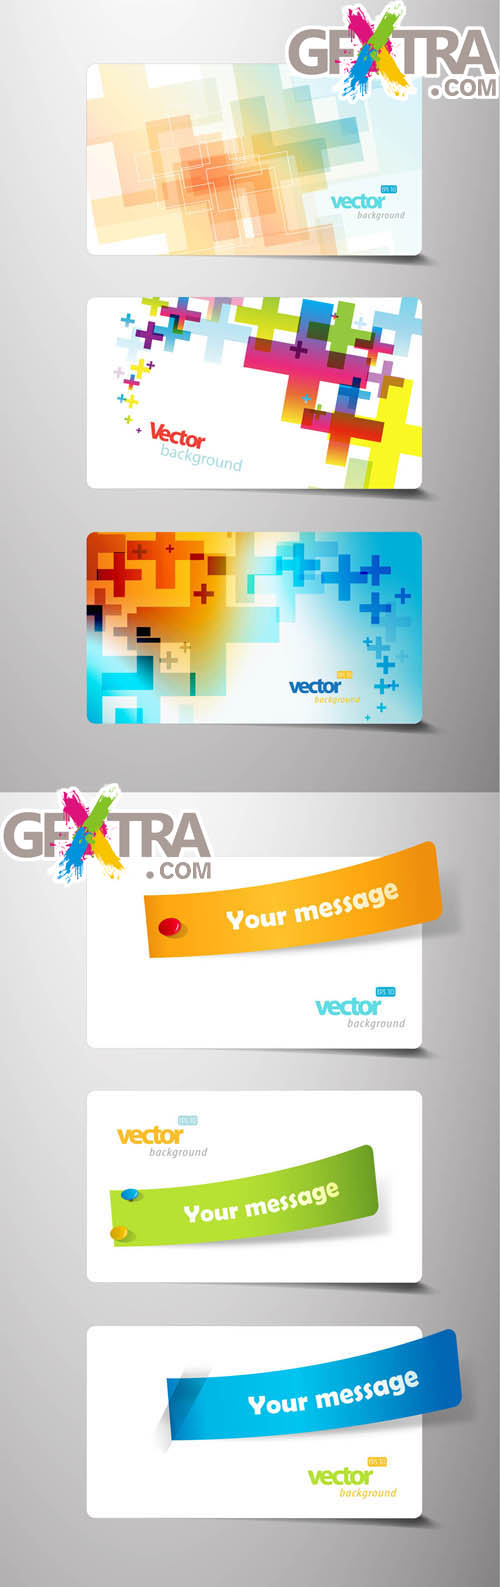 Vector Elements Creative Cards #2